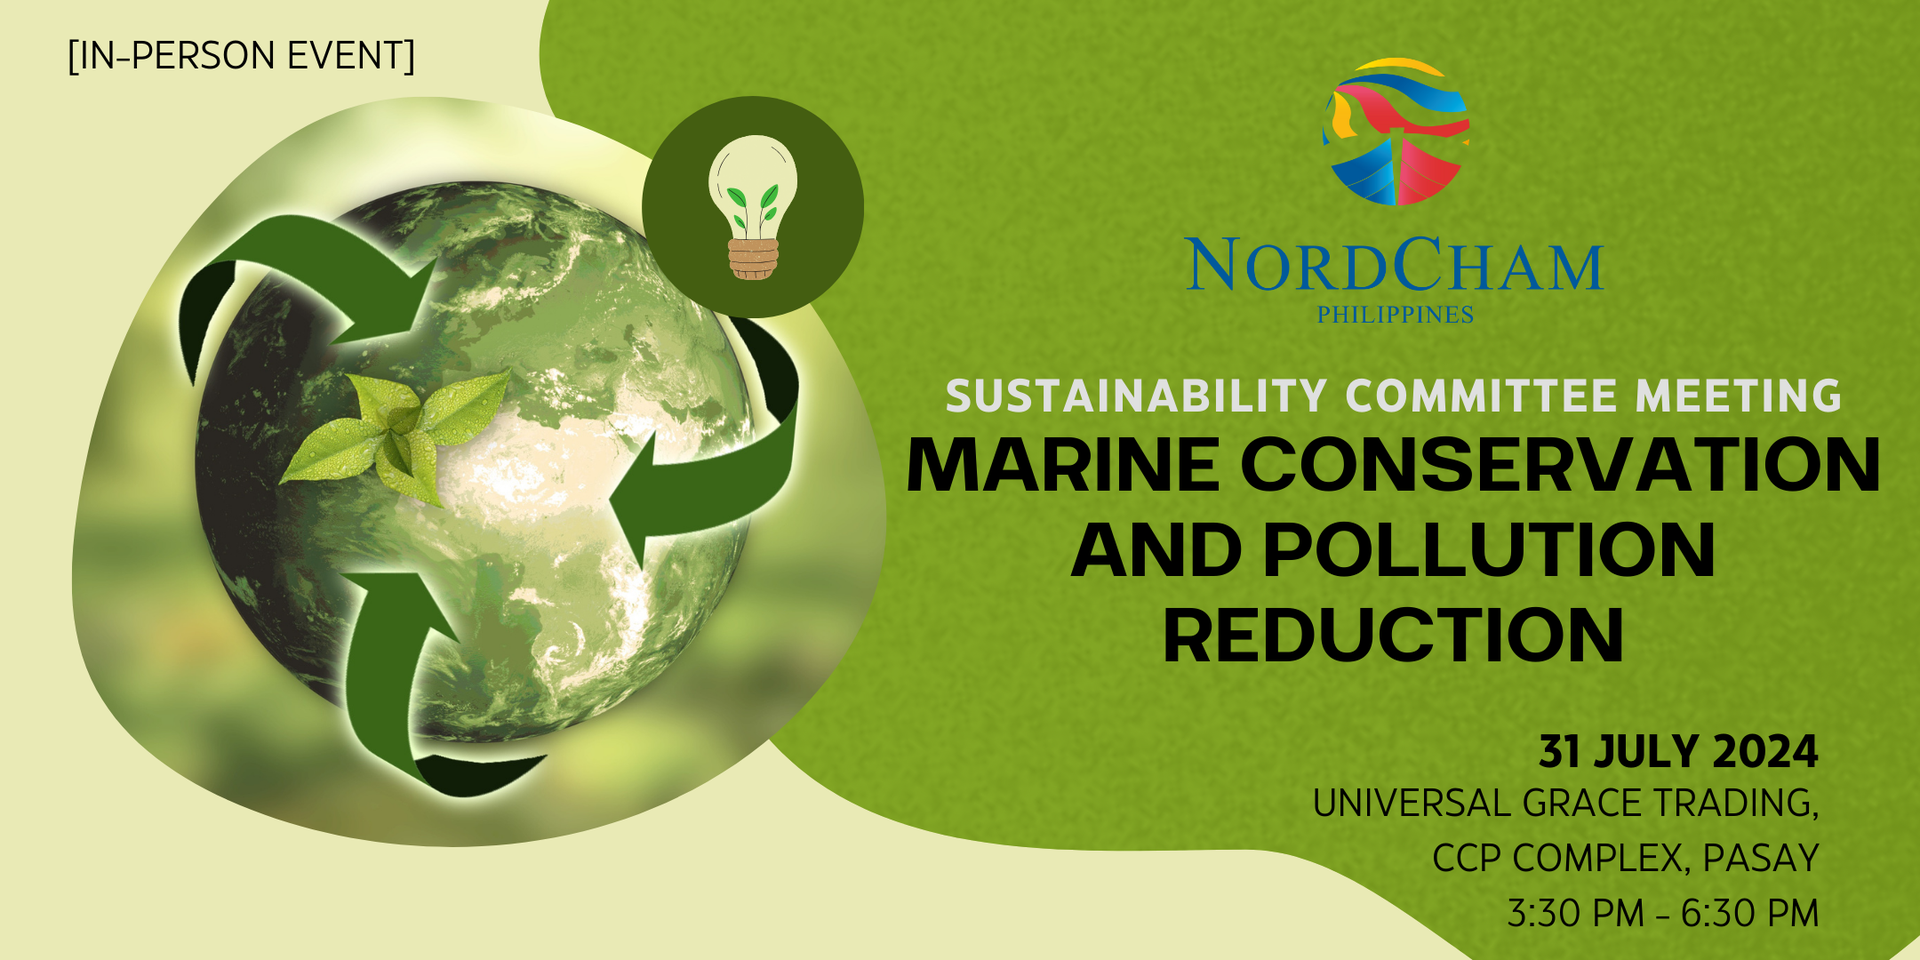 thumbnails SUSTAINABILITY COMMITTEE MEETING: MARINE CONSERVATION AND POLLUTION REDUCTION | 31 JULY 2024 | UNIVERSAL GRACE TRADING CORPORATION, CCP COMPLEX, PASAY